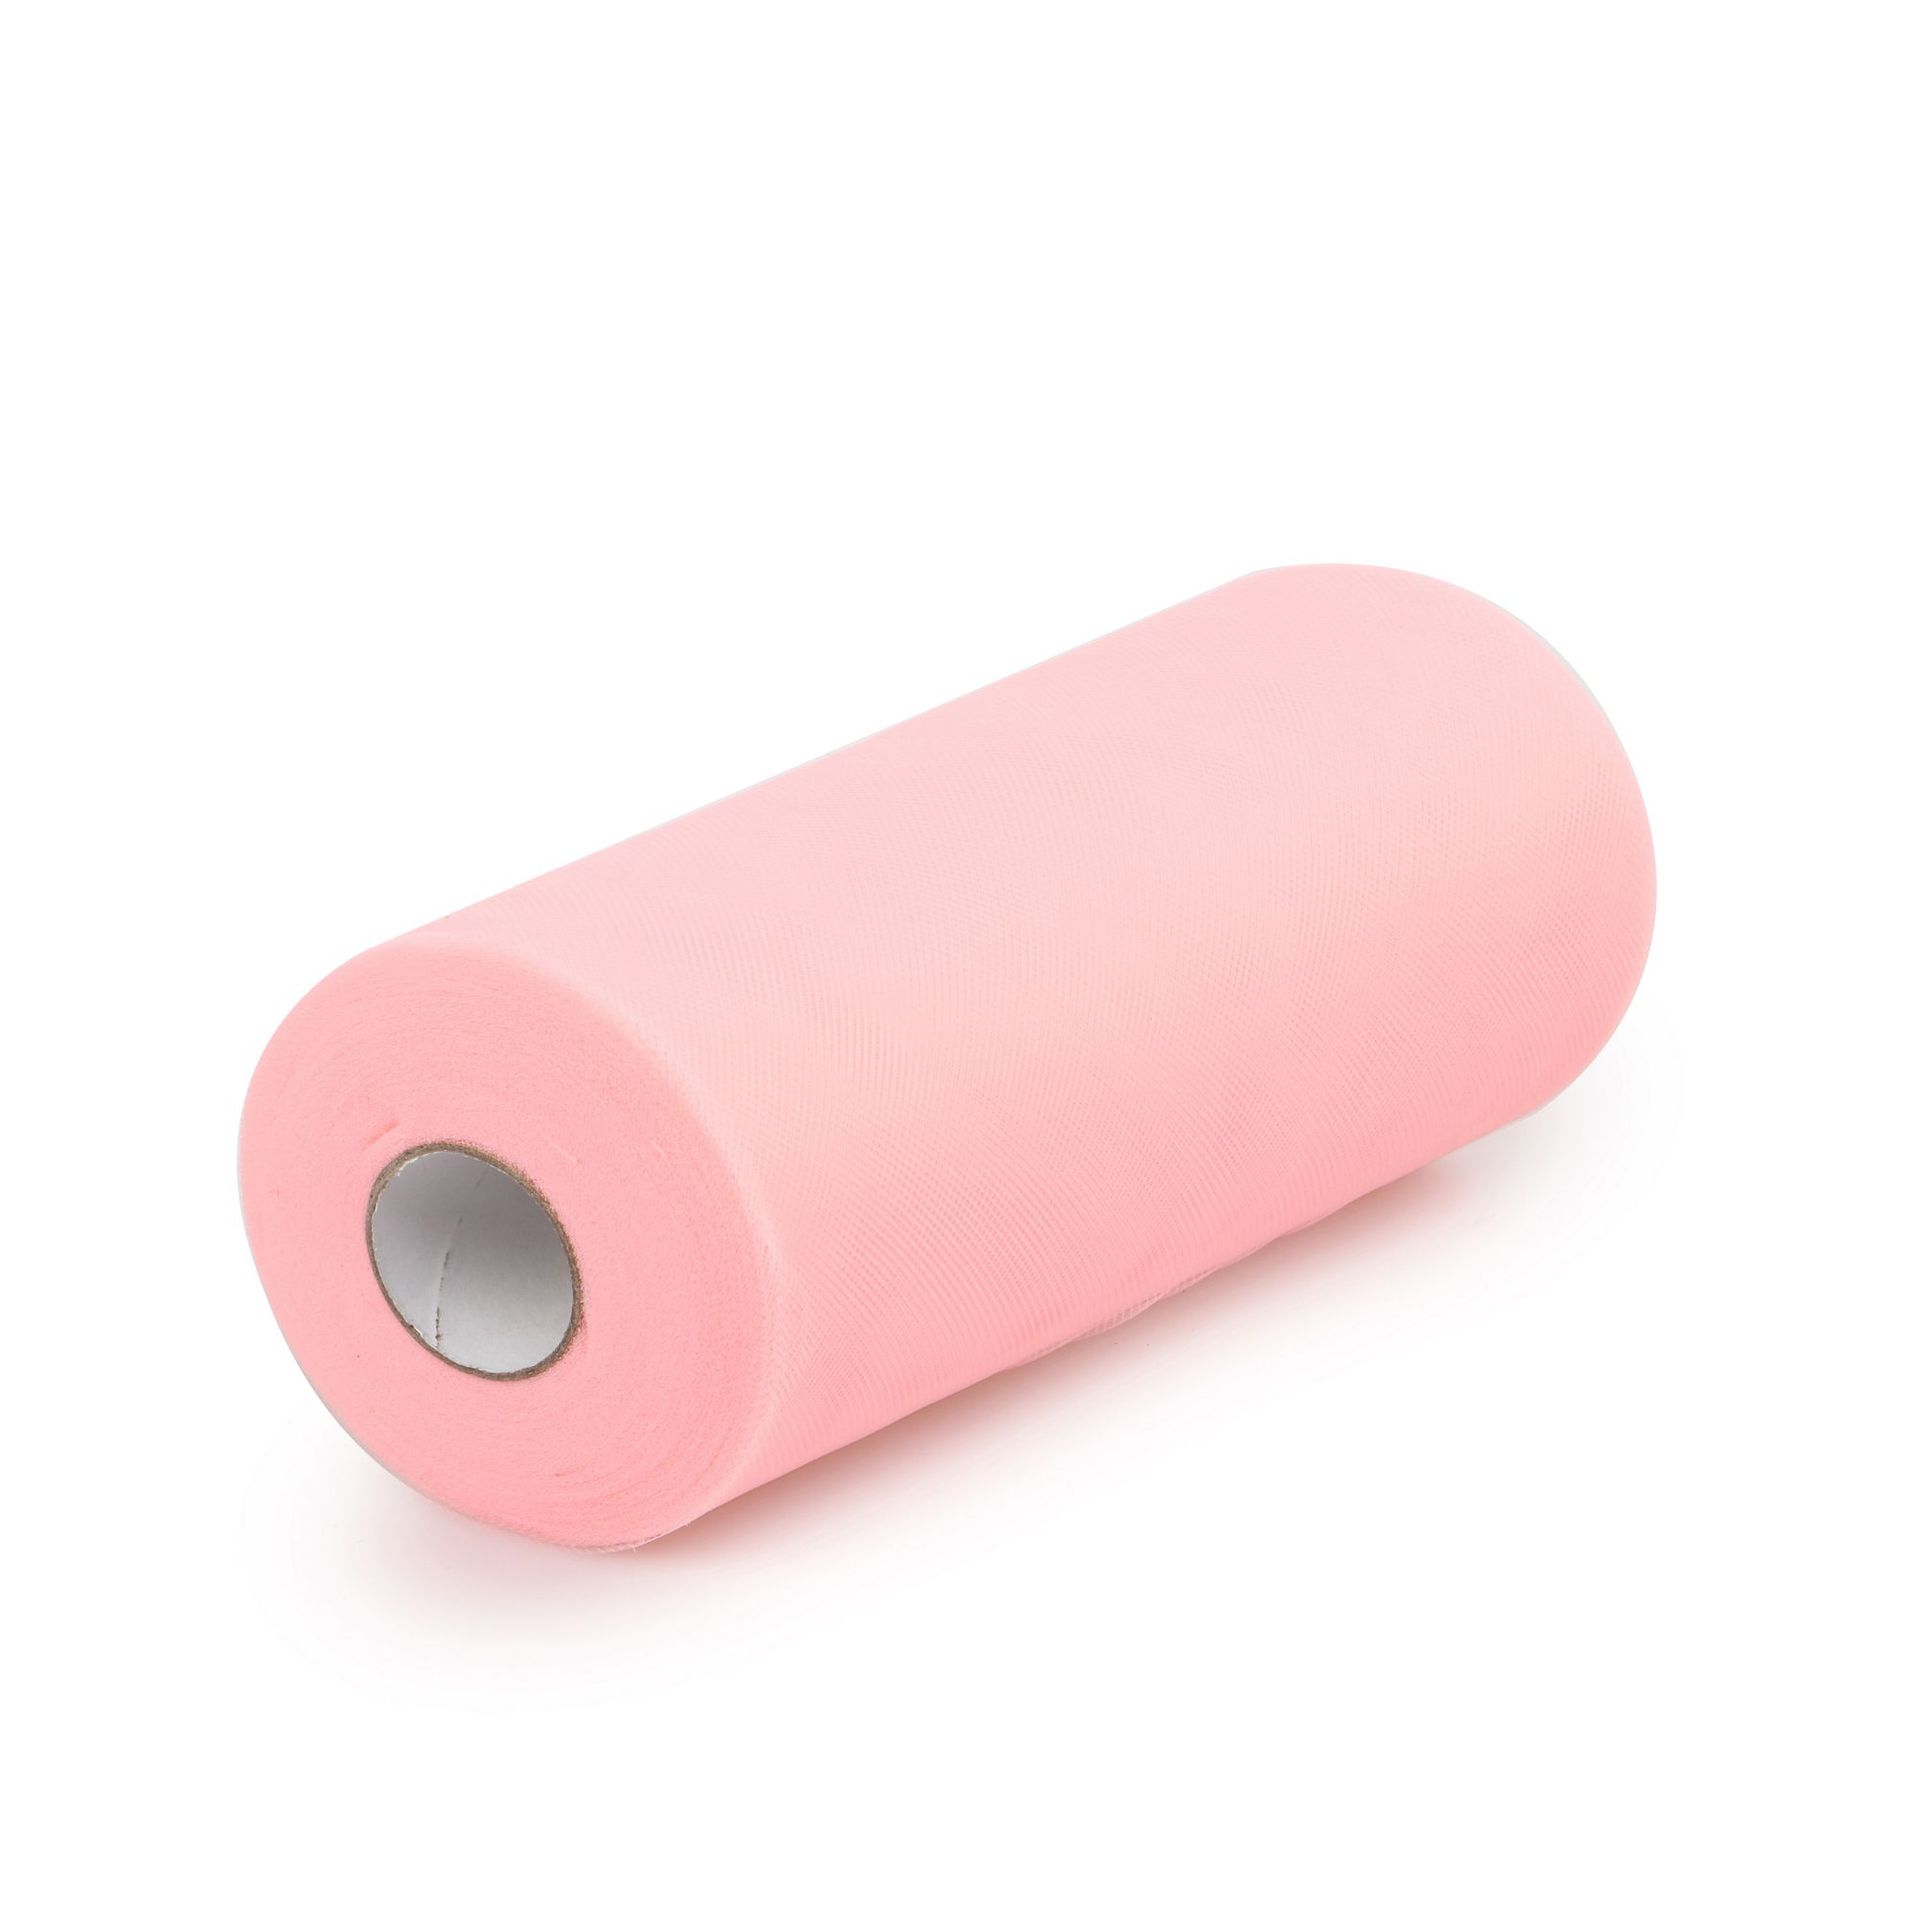 Tulle Fabric Rolls 6 Inch by 100 Yards 300 ft White/Pink Tulle